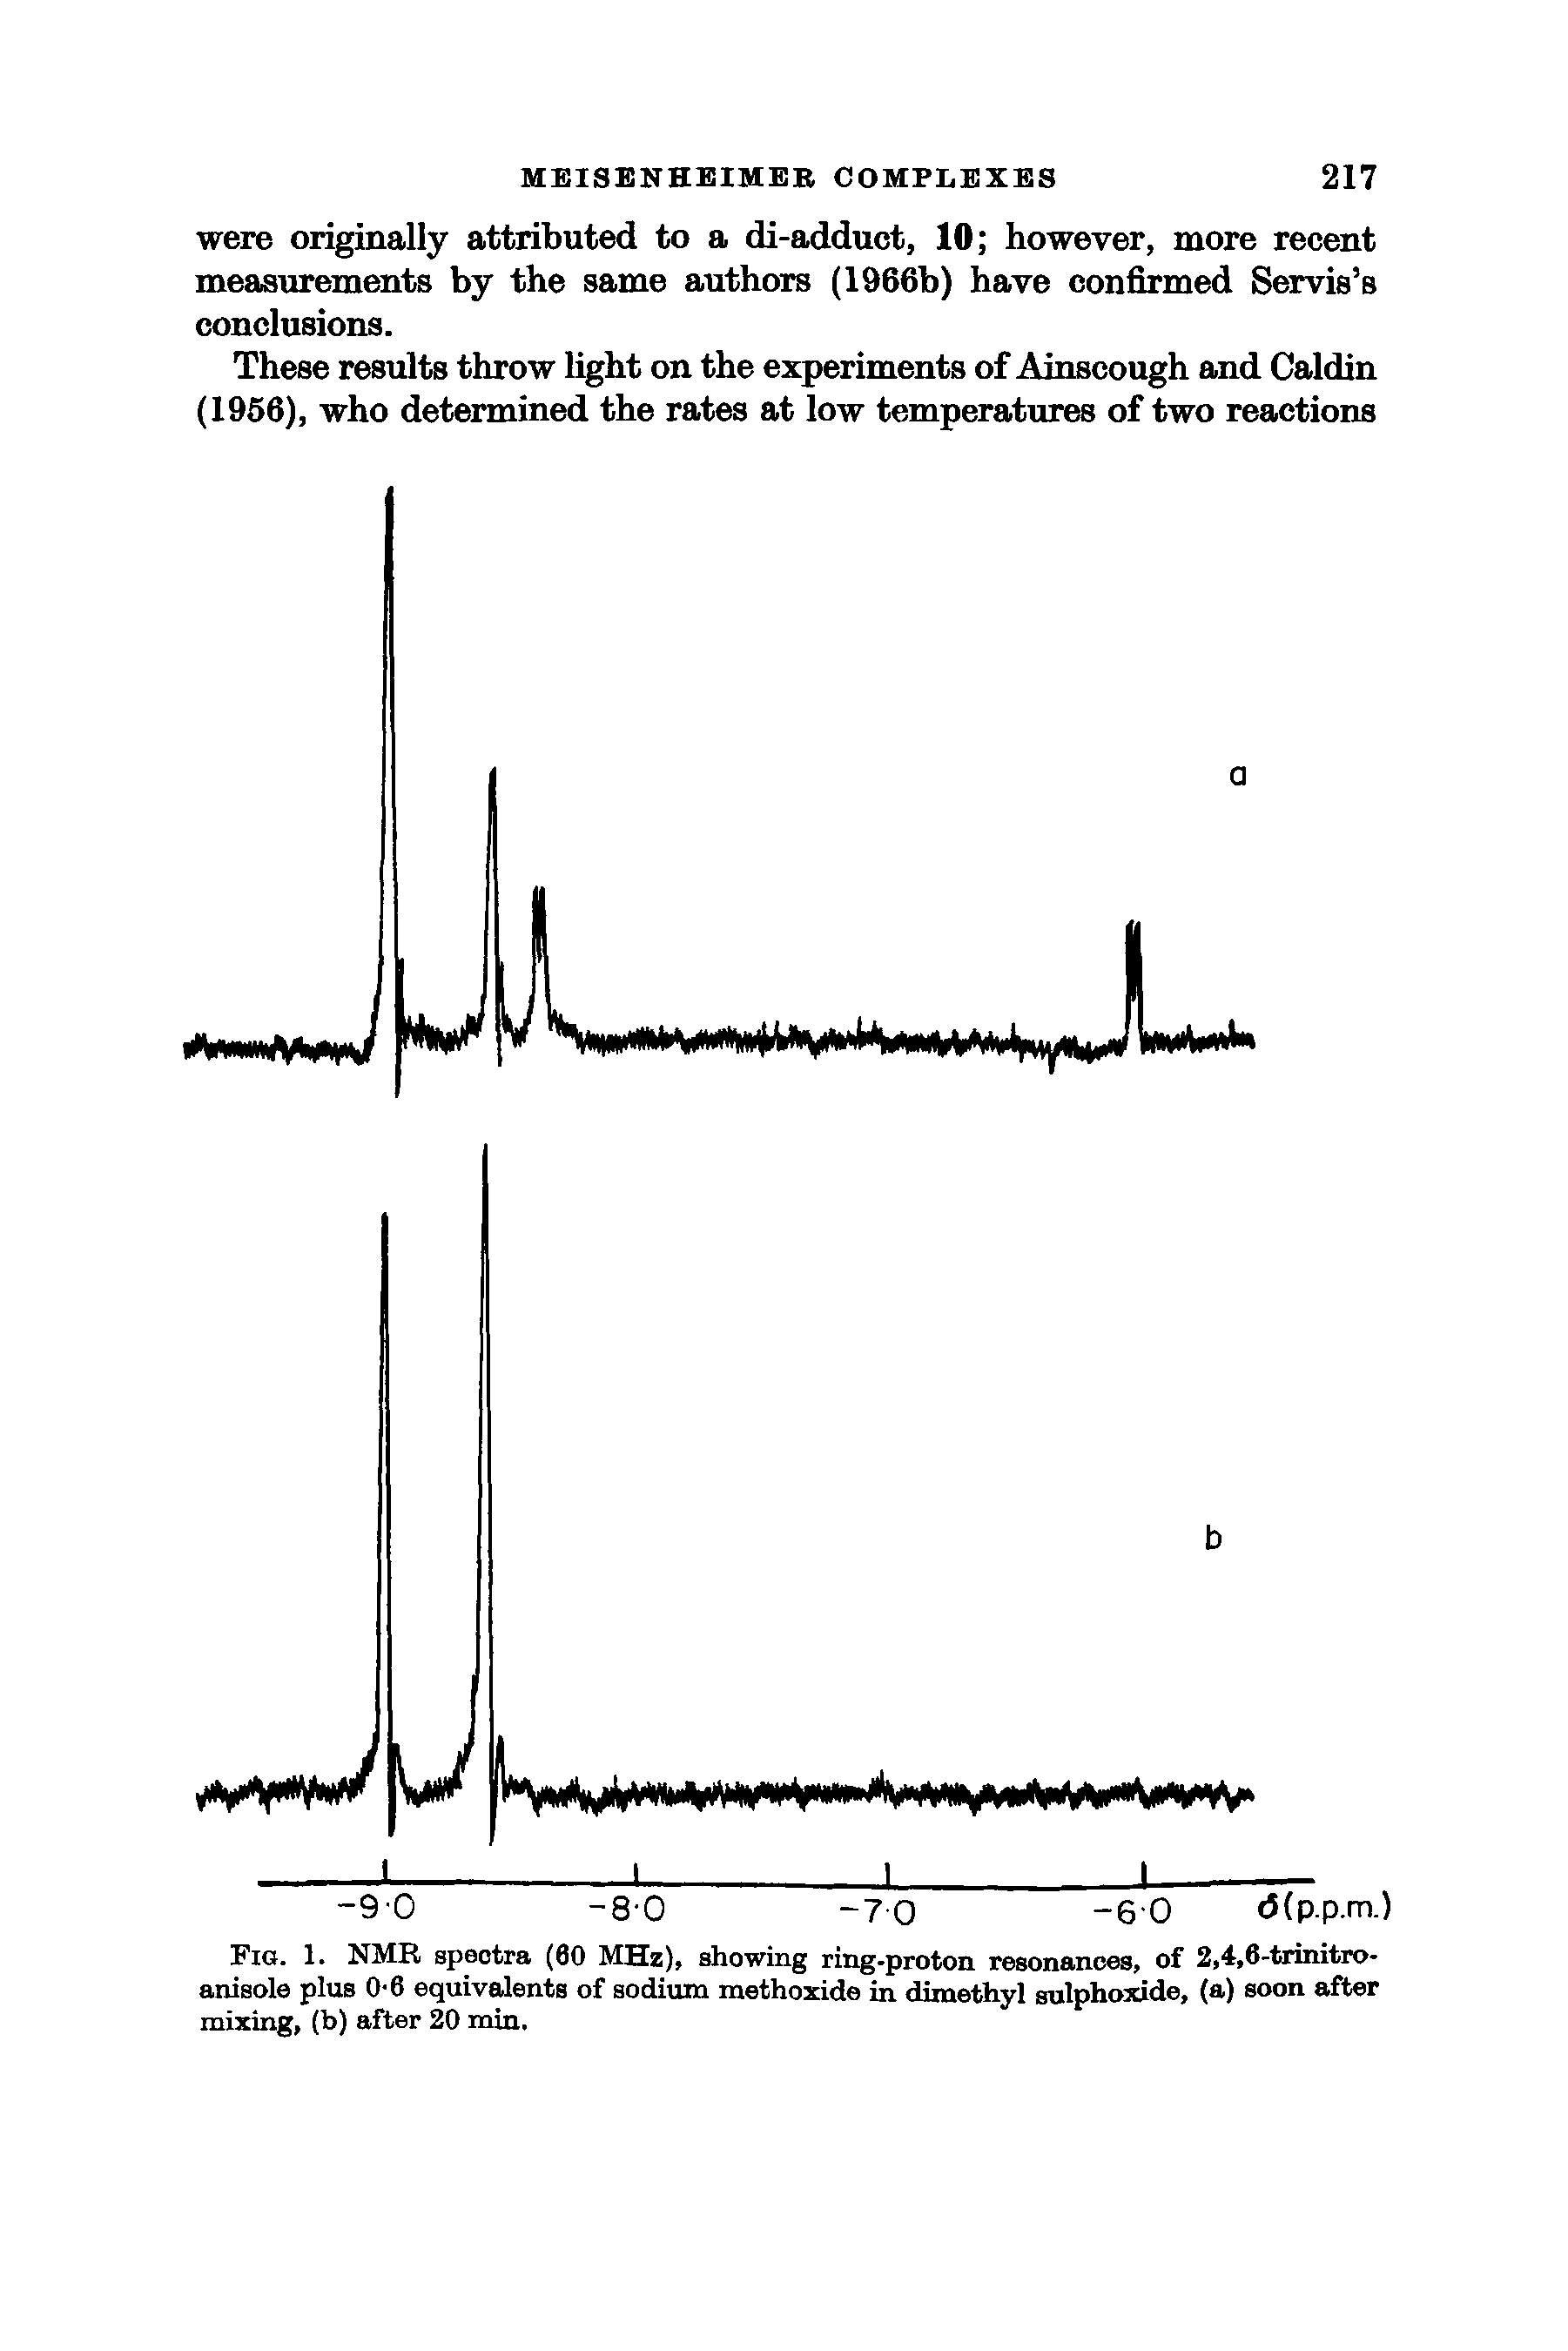 Fig. 1. NMR spectra (00 MHz), showing ring-proton resonances, of 2,4,6-trinitro-anisole plus O 6 equivalents of sodium methoxide in dimethyl sulphoxide, (a) soon after mixing, (b) after 20 min.